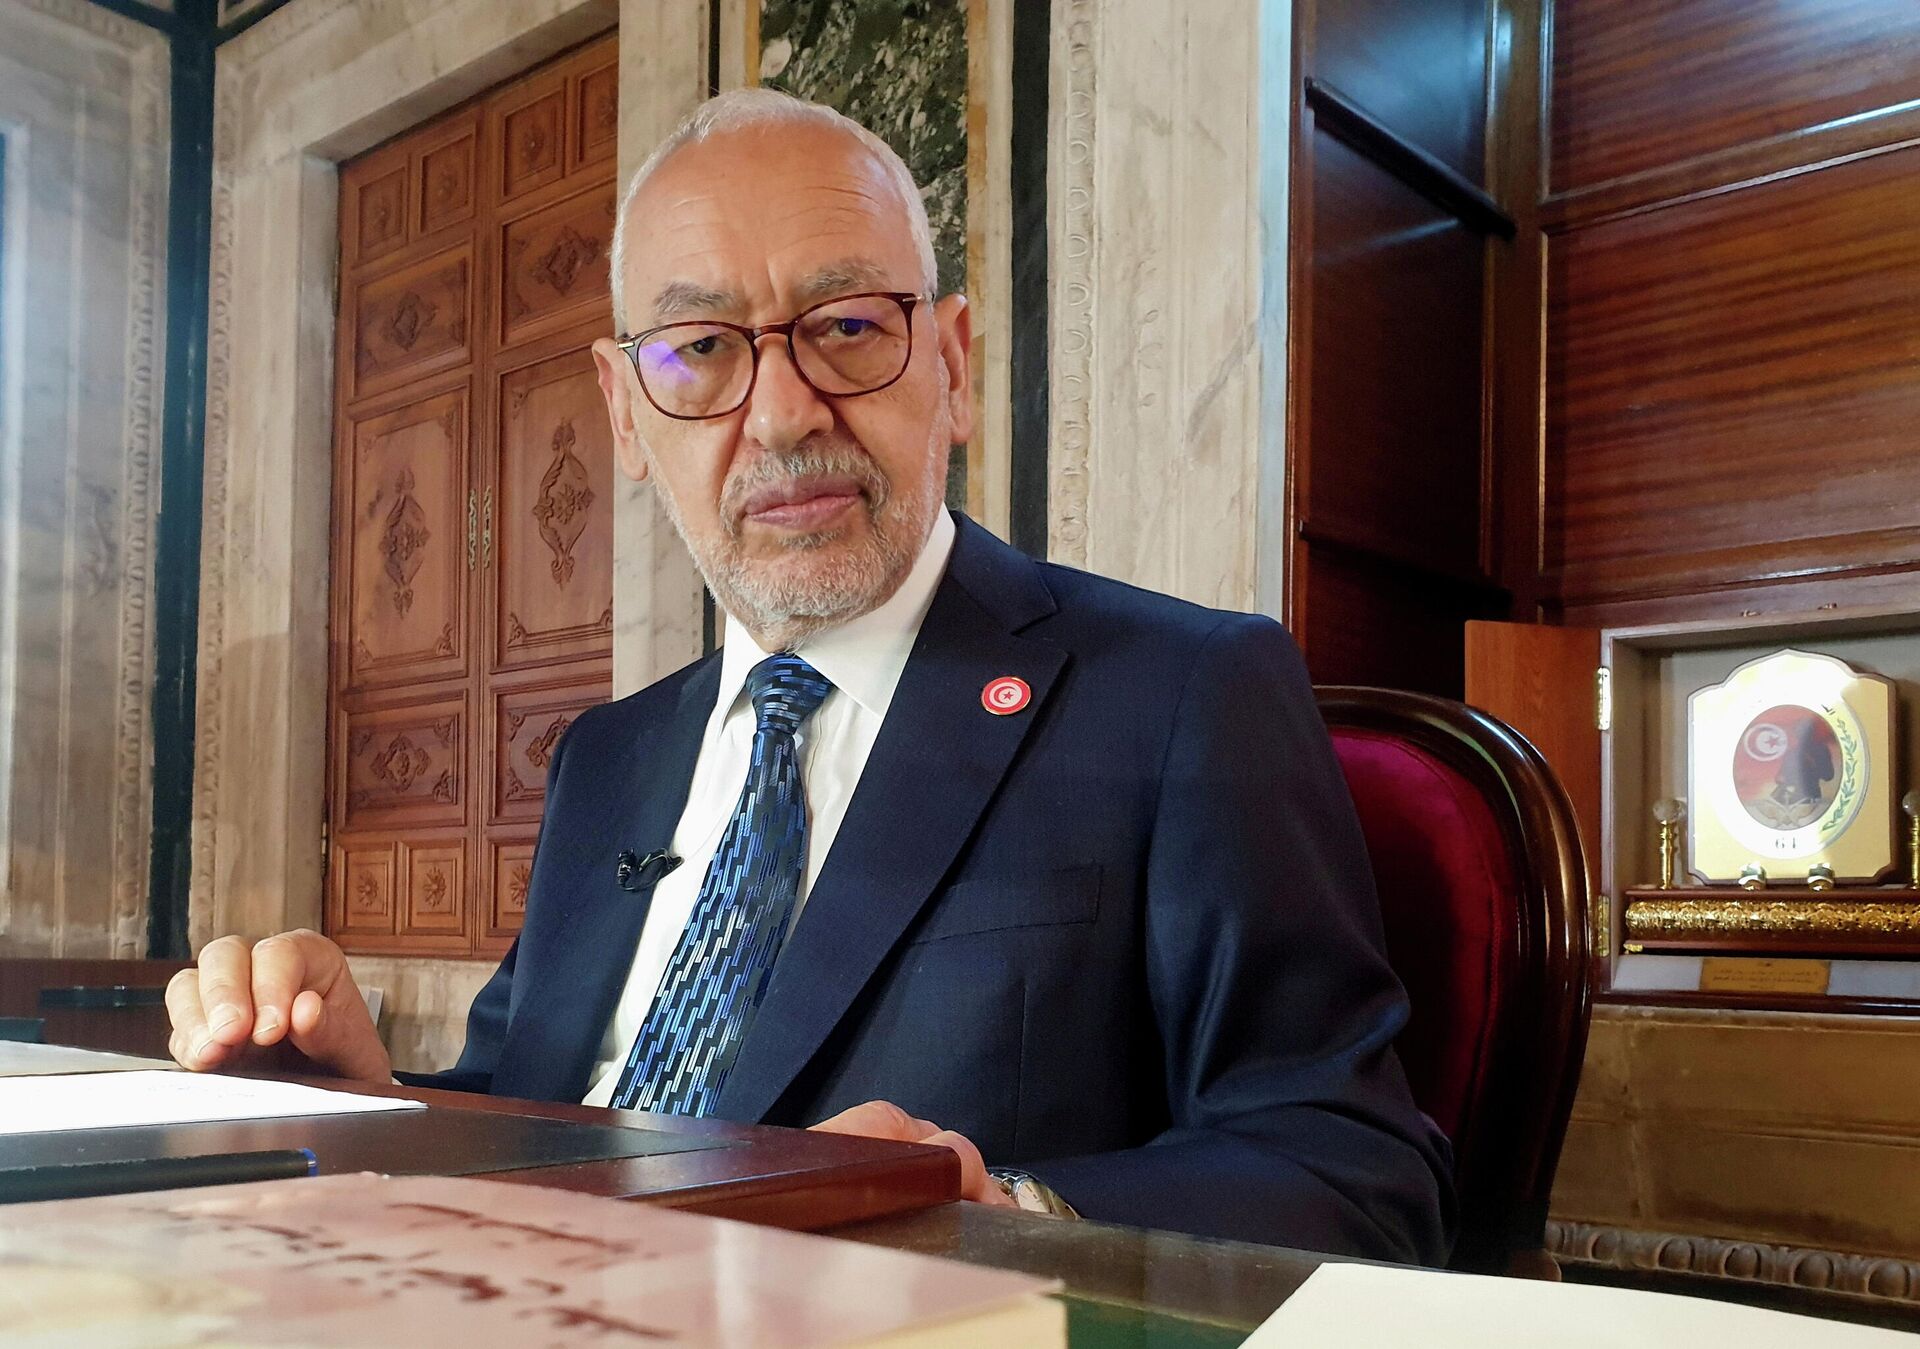 Parliament Speaker Rached Ghannouchi, head of the moderate Islamist Ennahda, poses during an interview with Reuters in his office, in Tunis, Tunisia, March 9, 2021. - Sputnik International, 1920, 02.10.2021